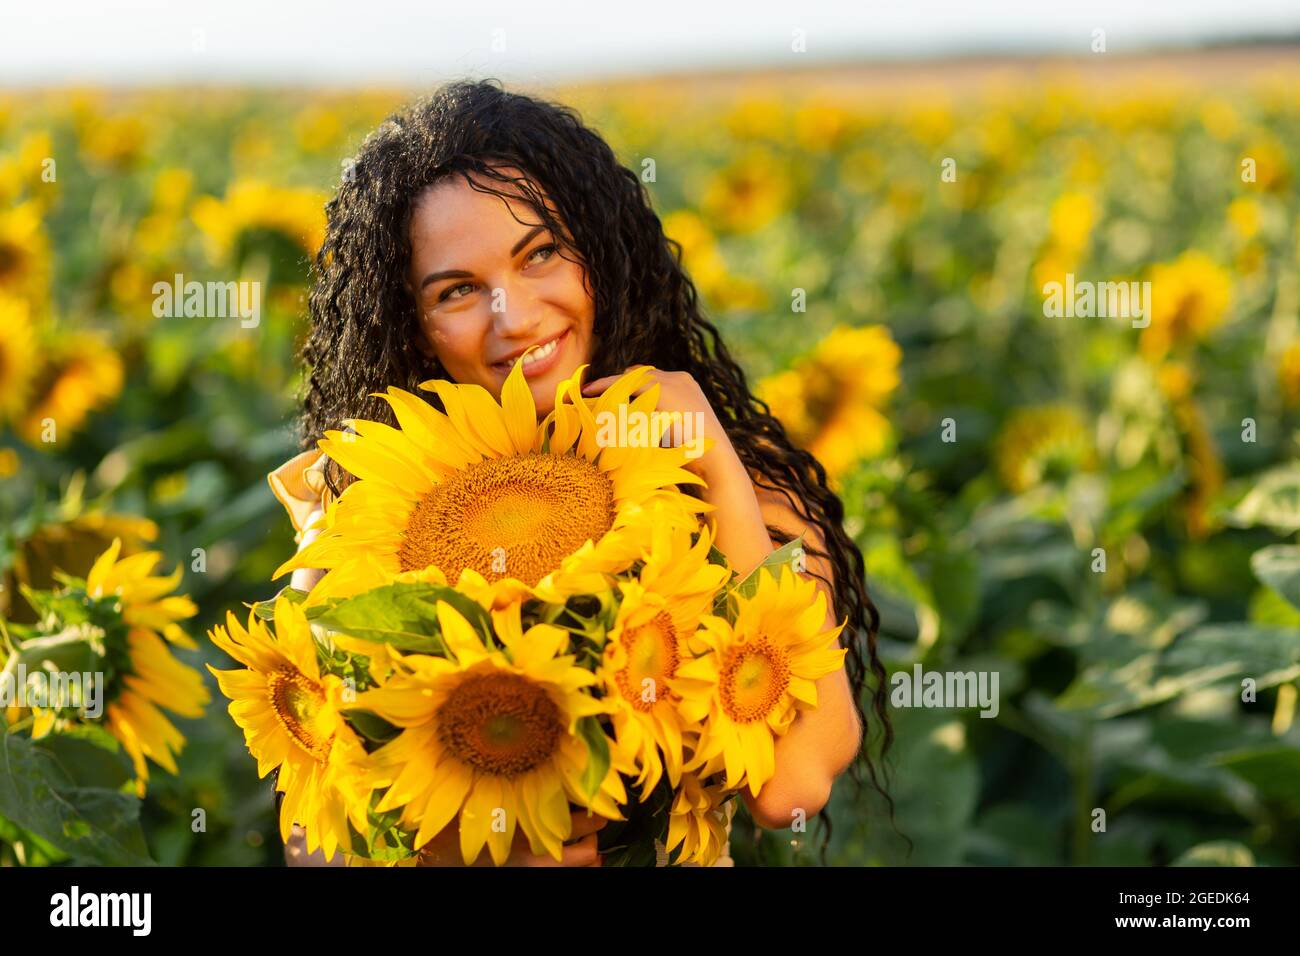 Portrait of a beautiful smiling dark-haired woman with bouquet of sunflowers Stock Photo